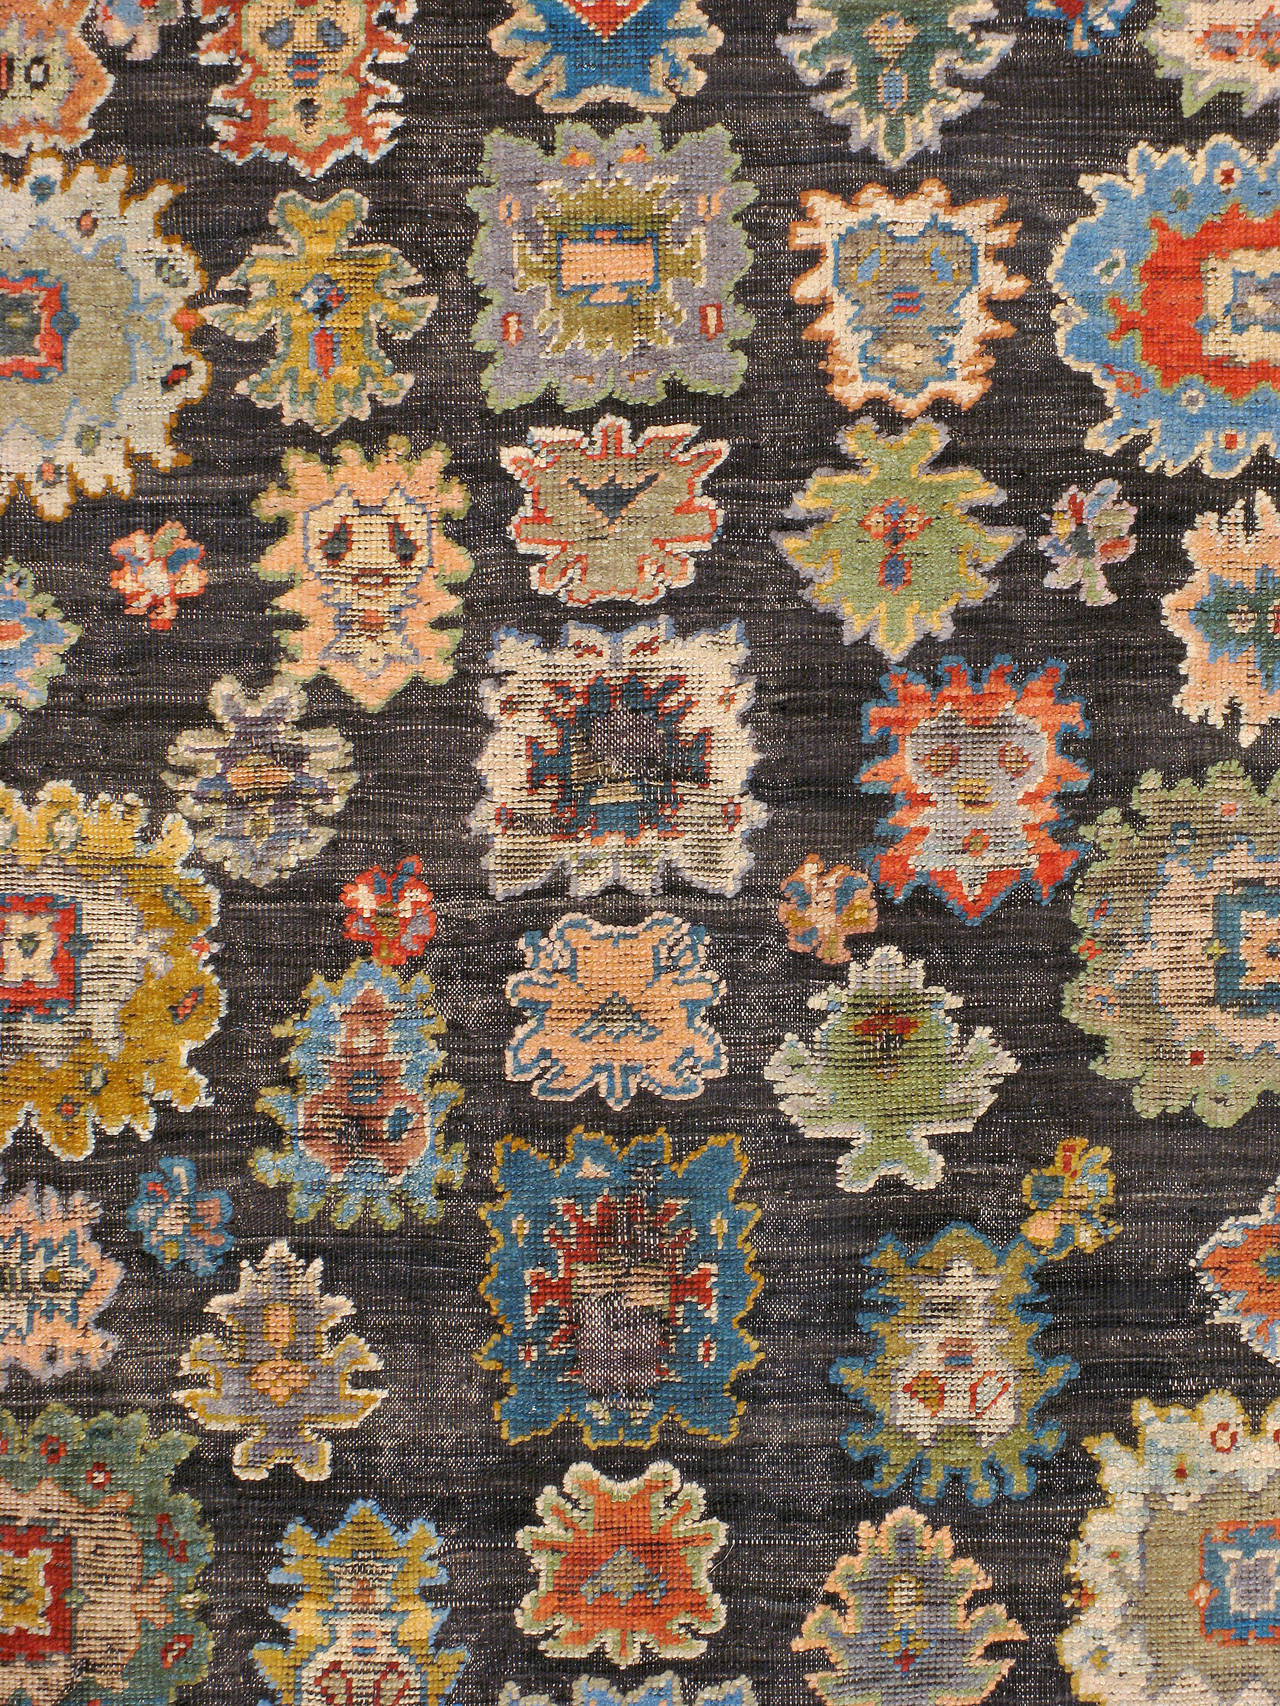 A contemporary Souf Oushak carpet from the fourth quarter of the 20th century. The rug is woven with repurposed old wool to create a vintage look and feel. A venerated technique, Souf is a flat-woven carpet with a raised pile to form its motif.